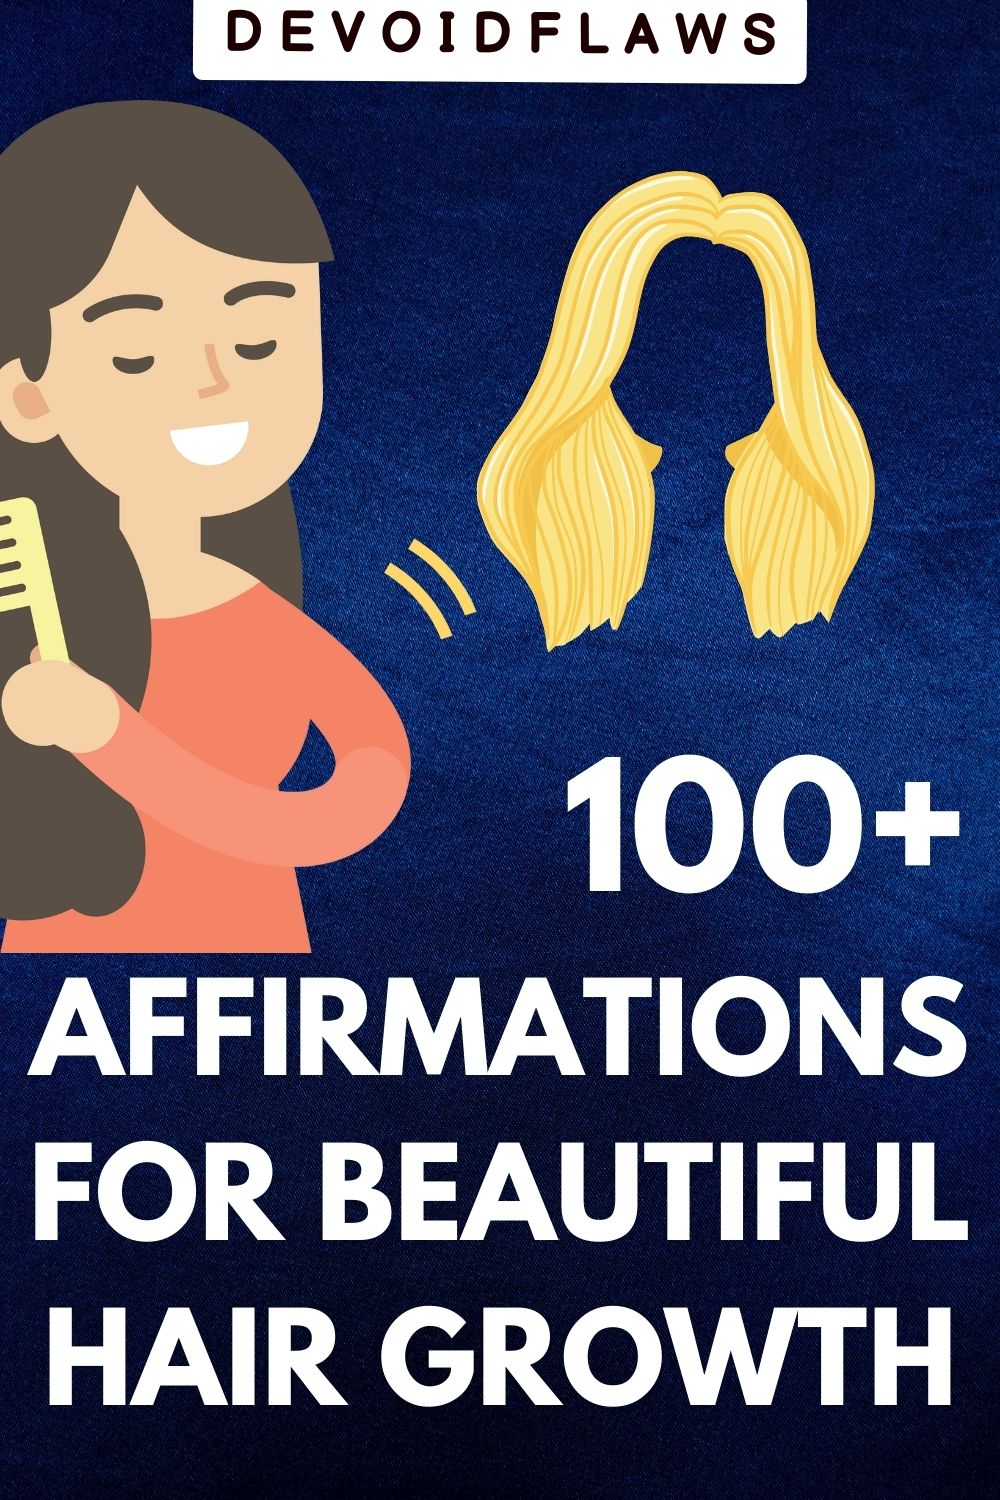 image with text - 100+ affirmations for beautiful hair growth